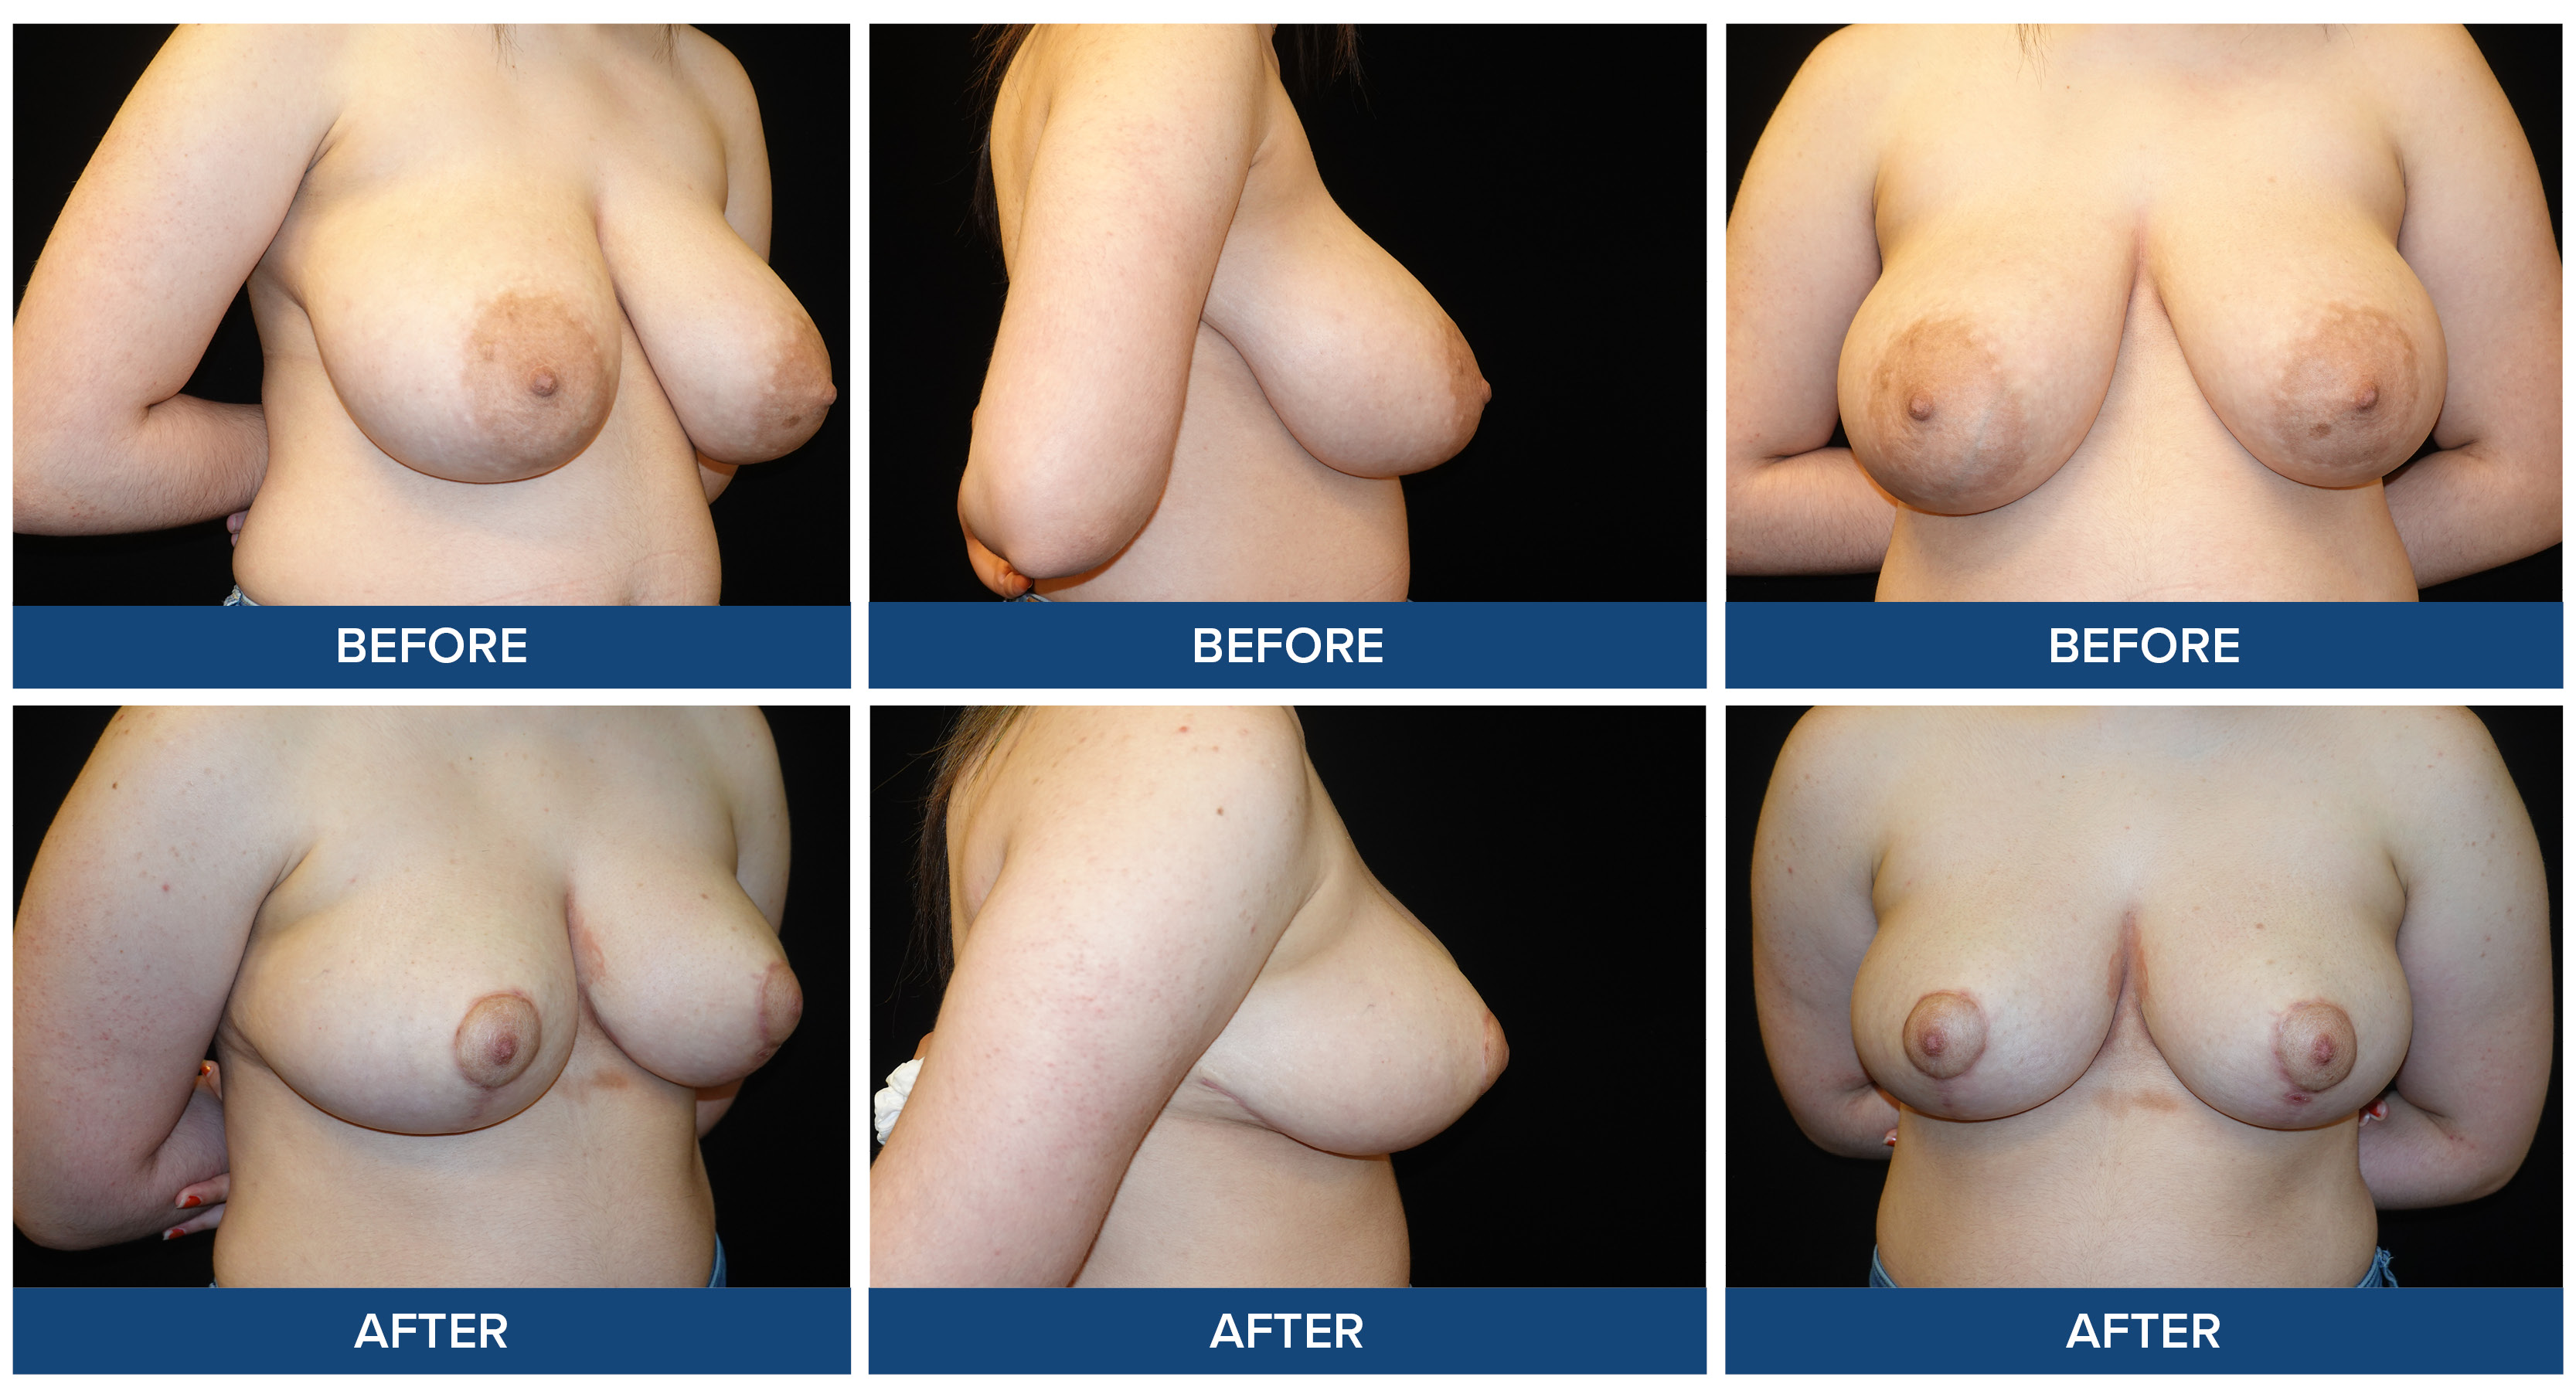 Before and after photos of a female patient bilateral breast reduction procedure.